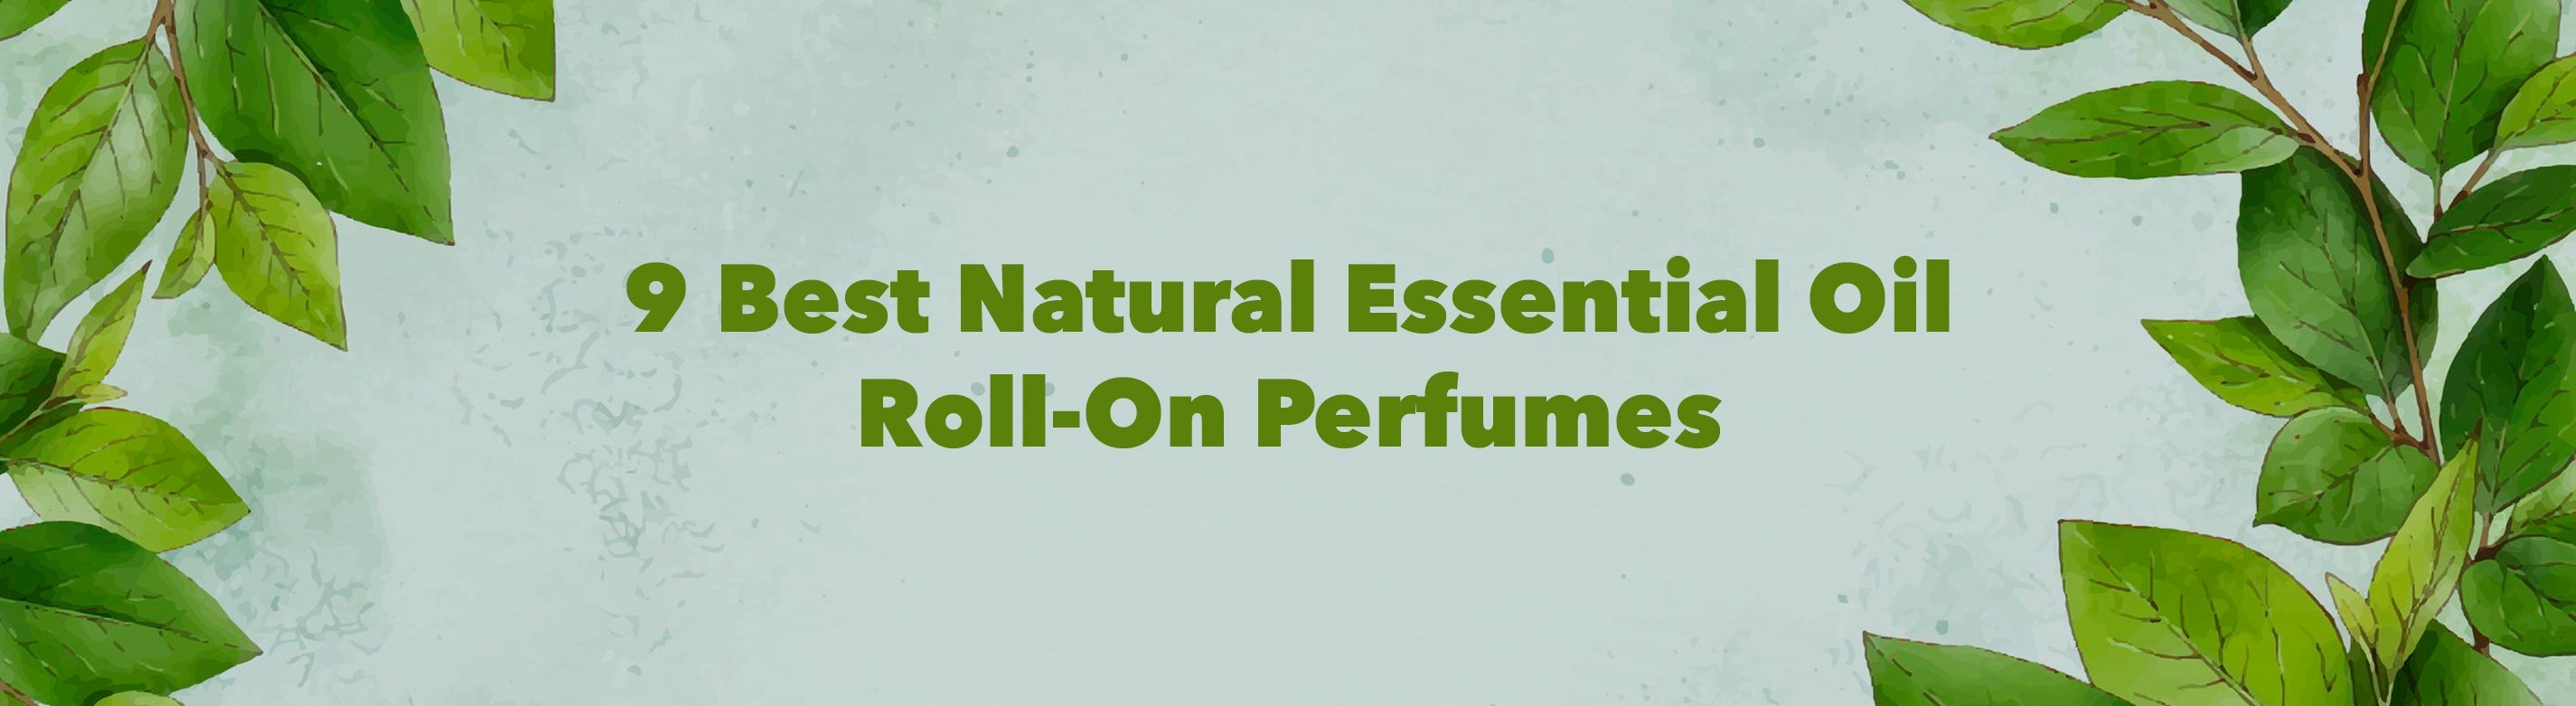 9 Best Natural Essential Oil Roll-On Perfumes